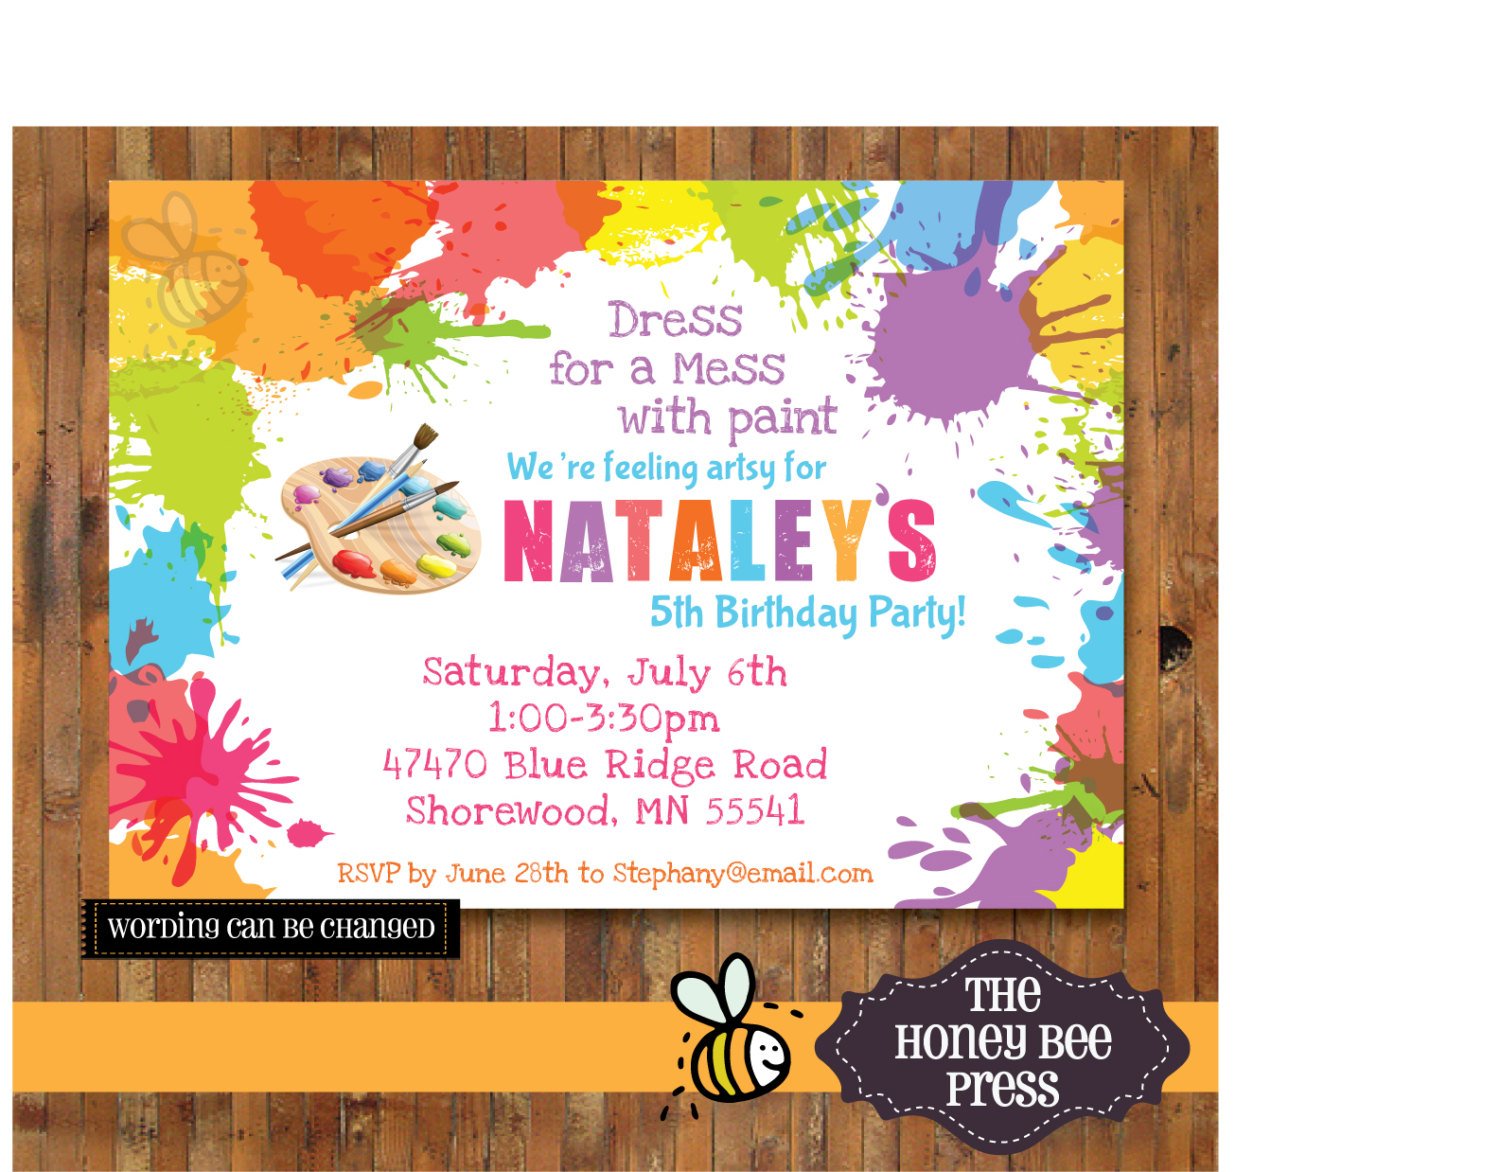 Children's Nail Art Party Invitations - wide 5